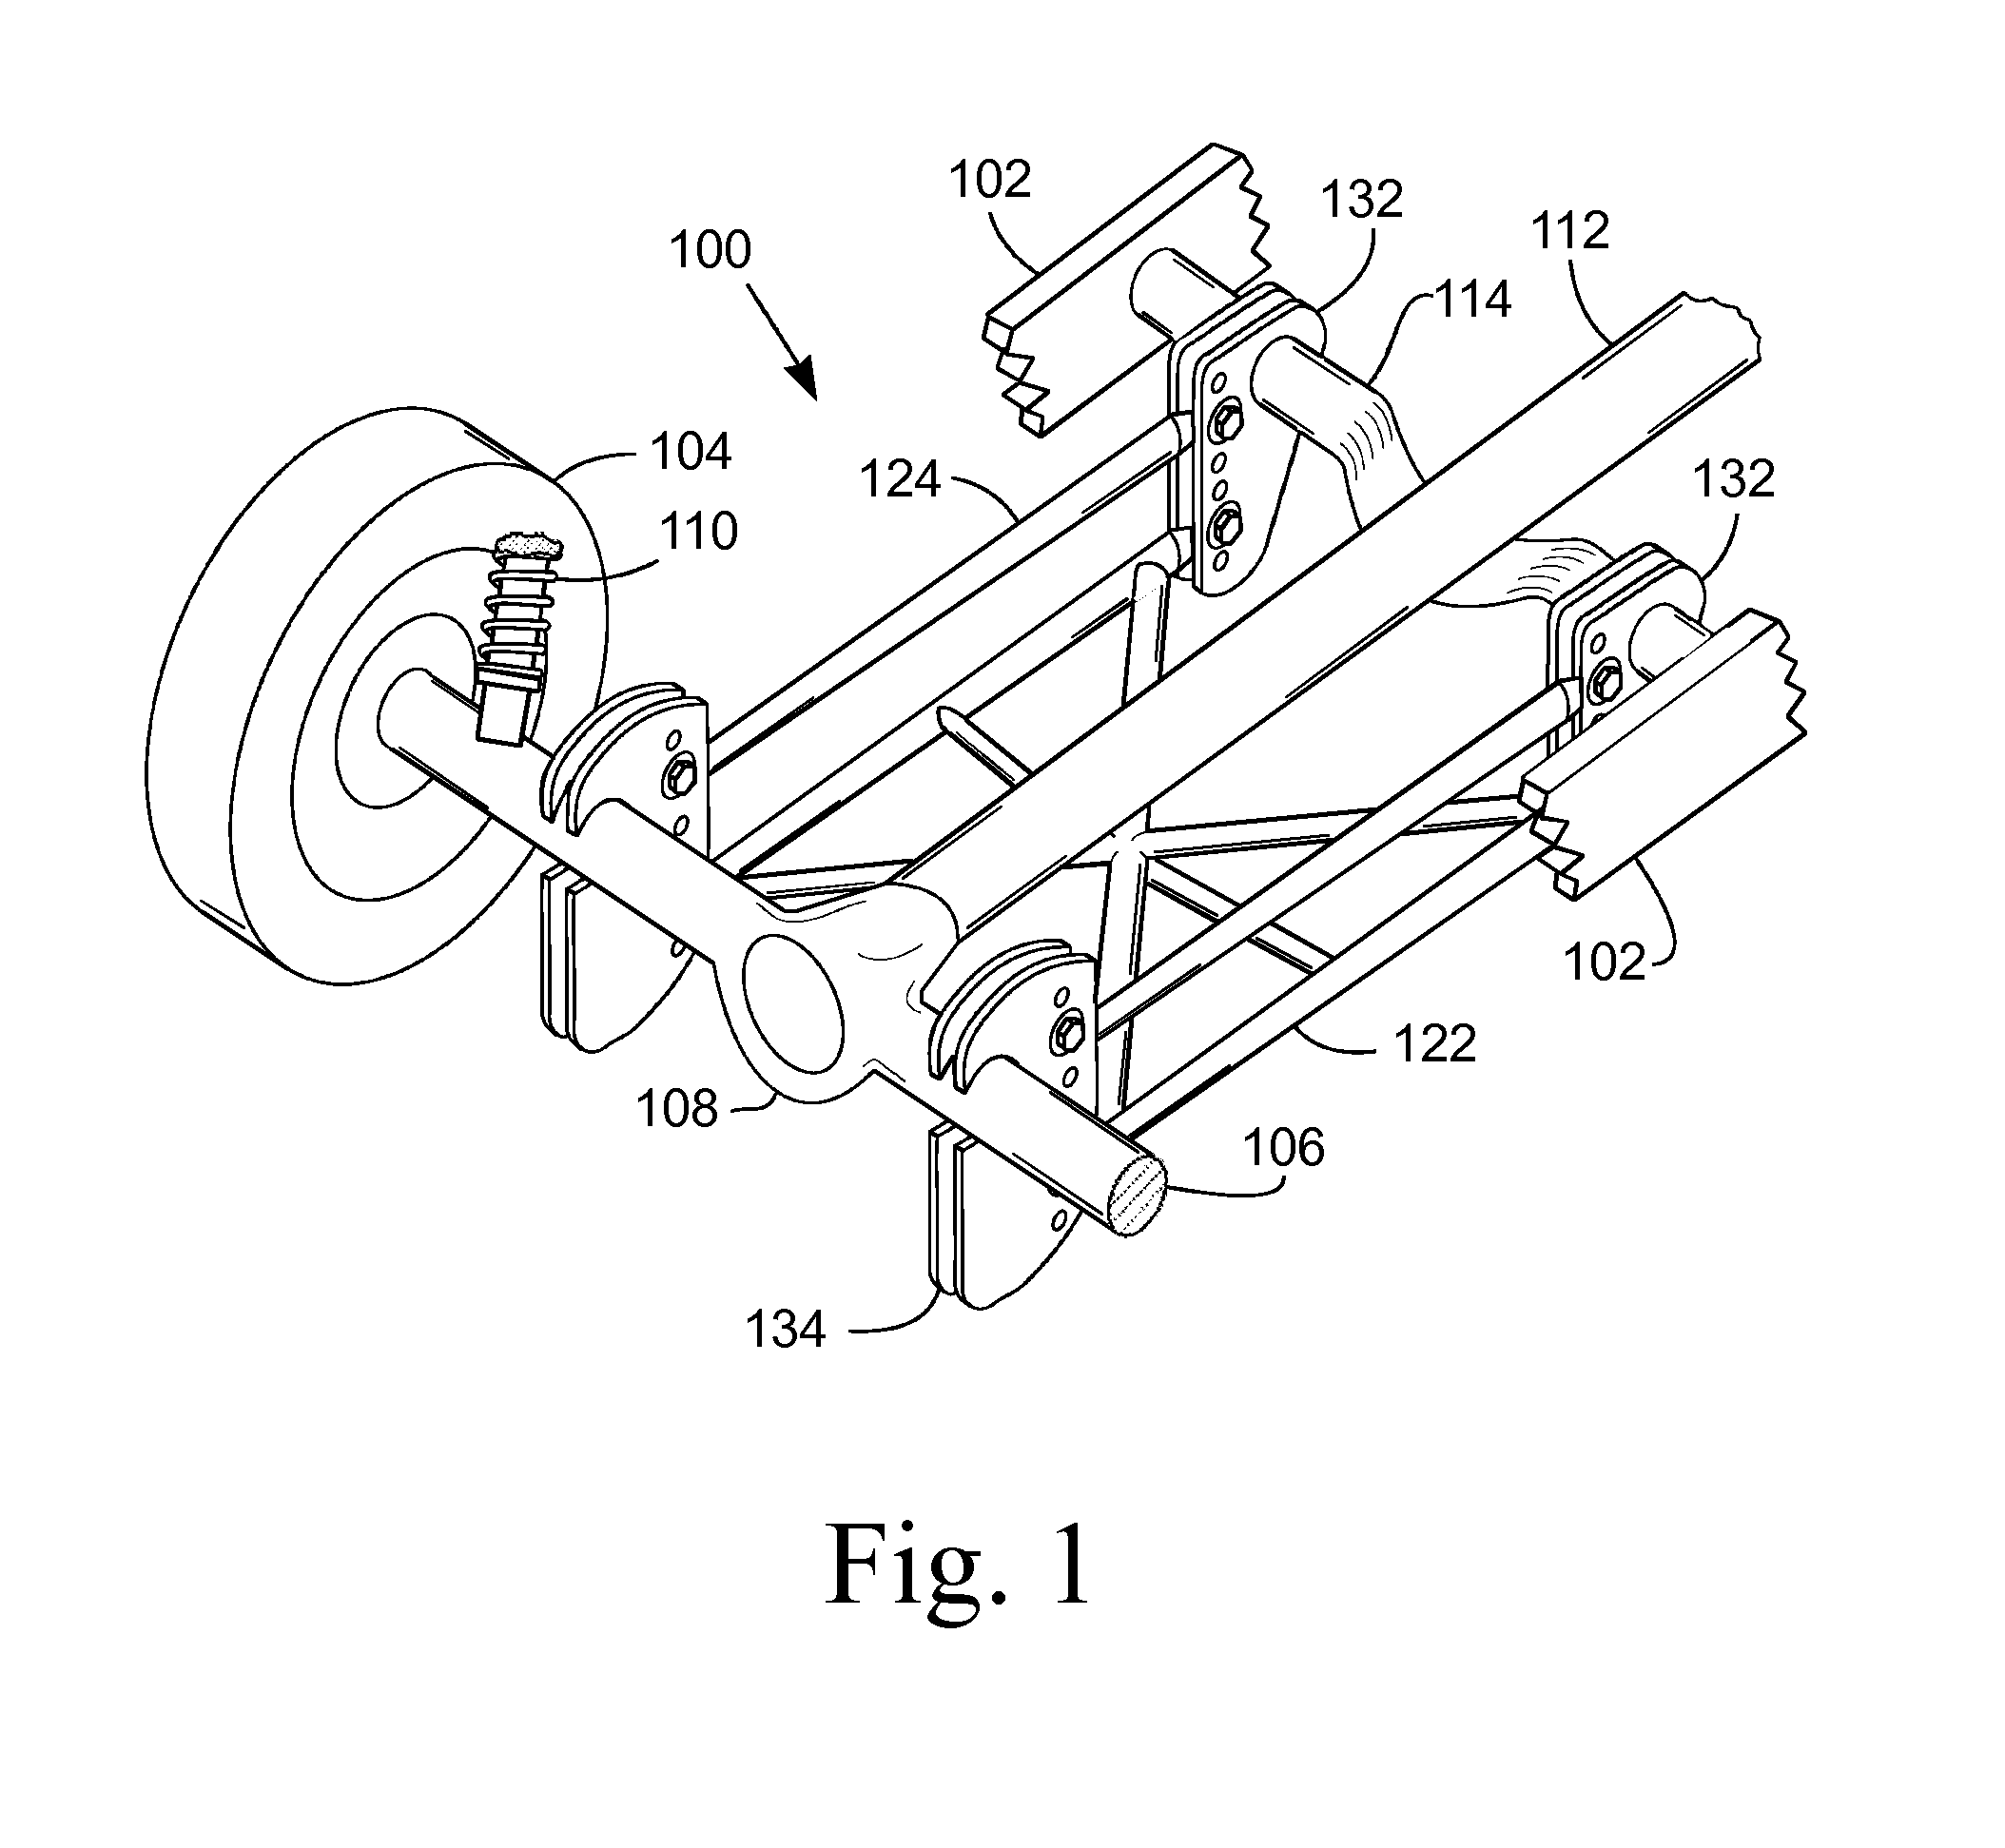 Rear suspension assembly for a drag racing vehicle